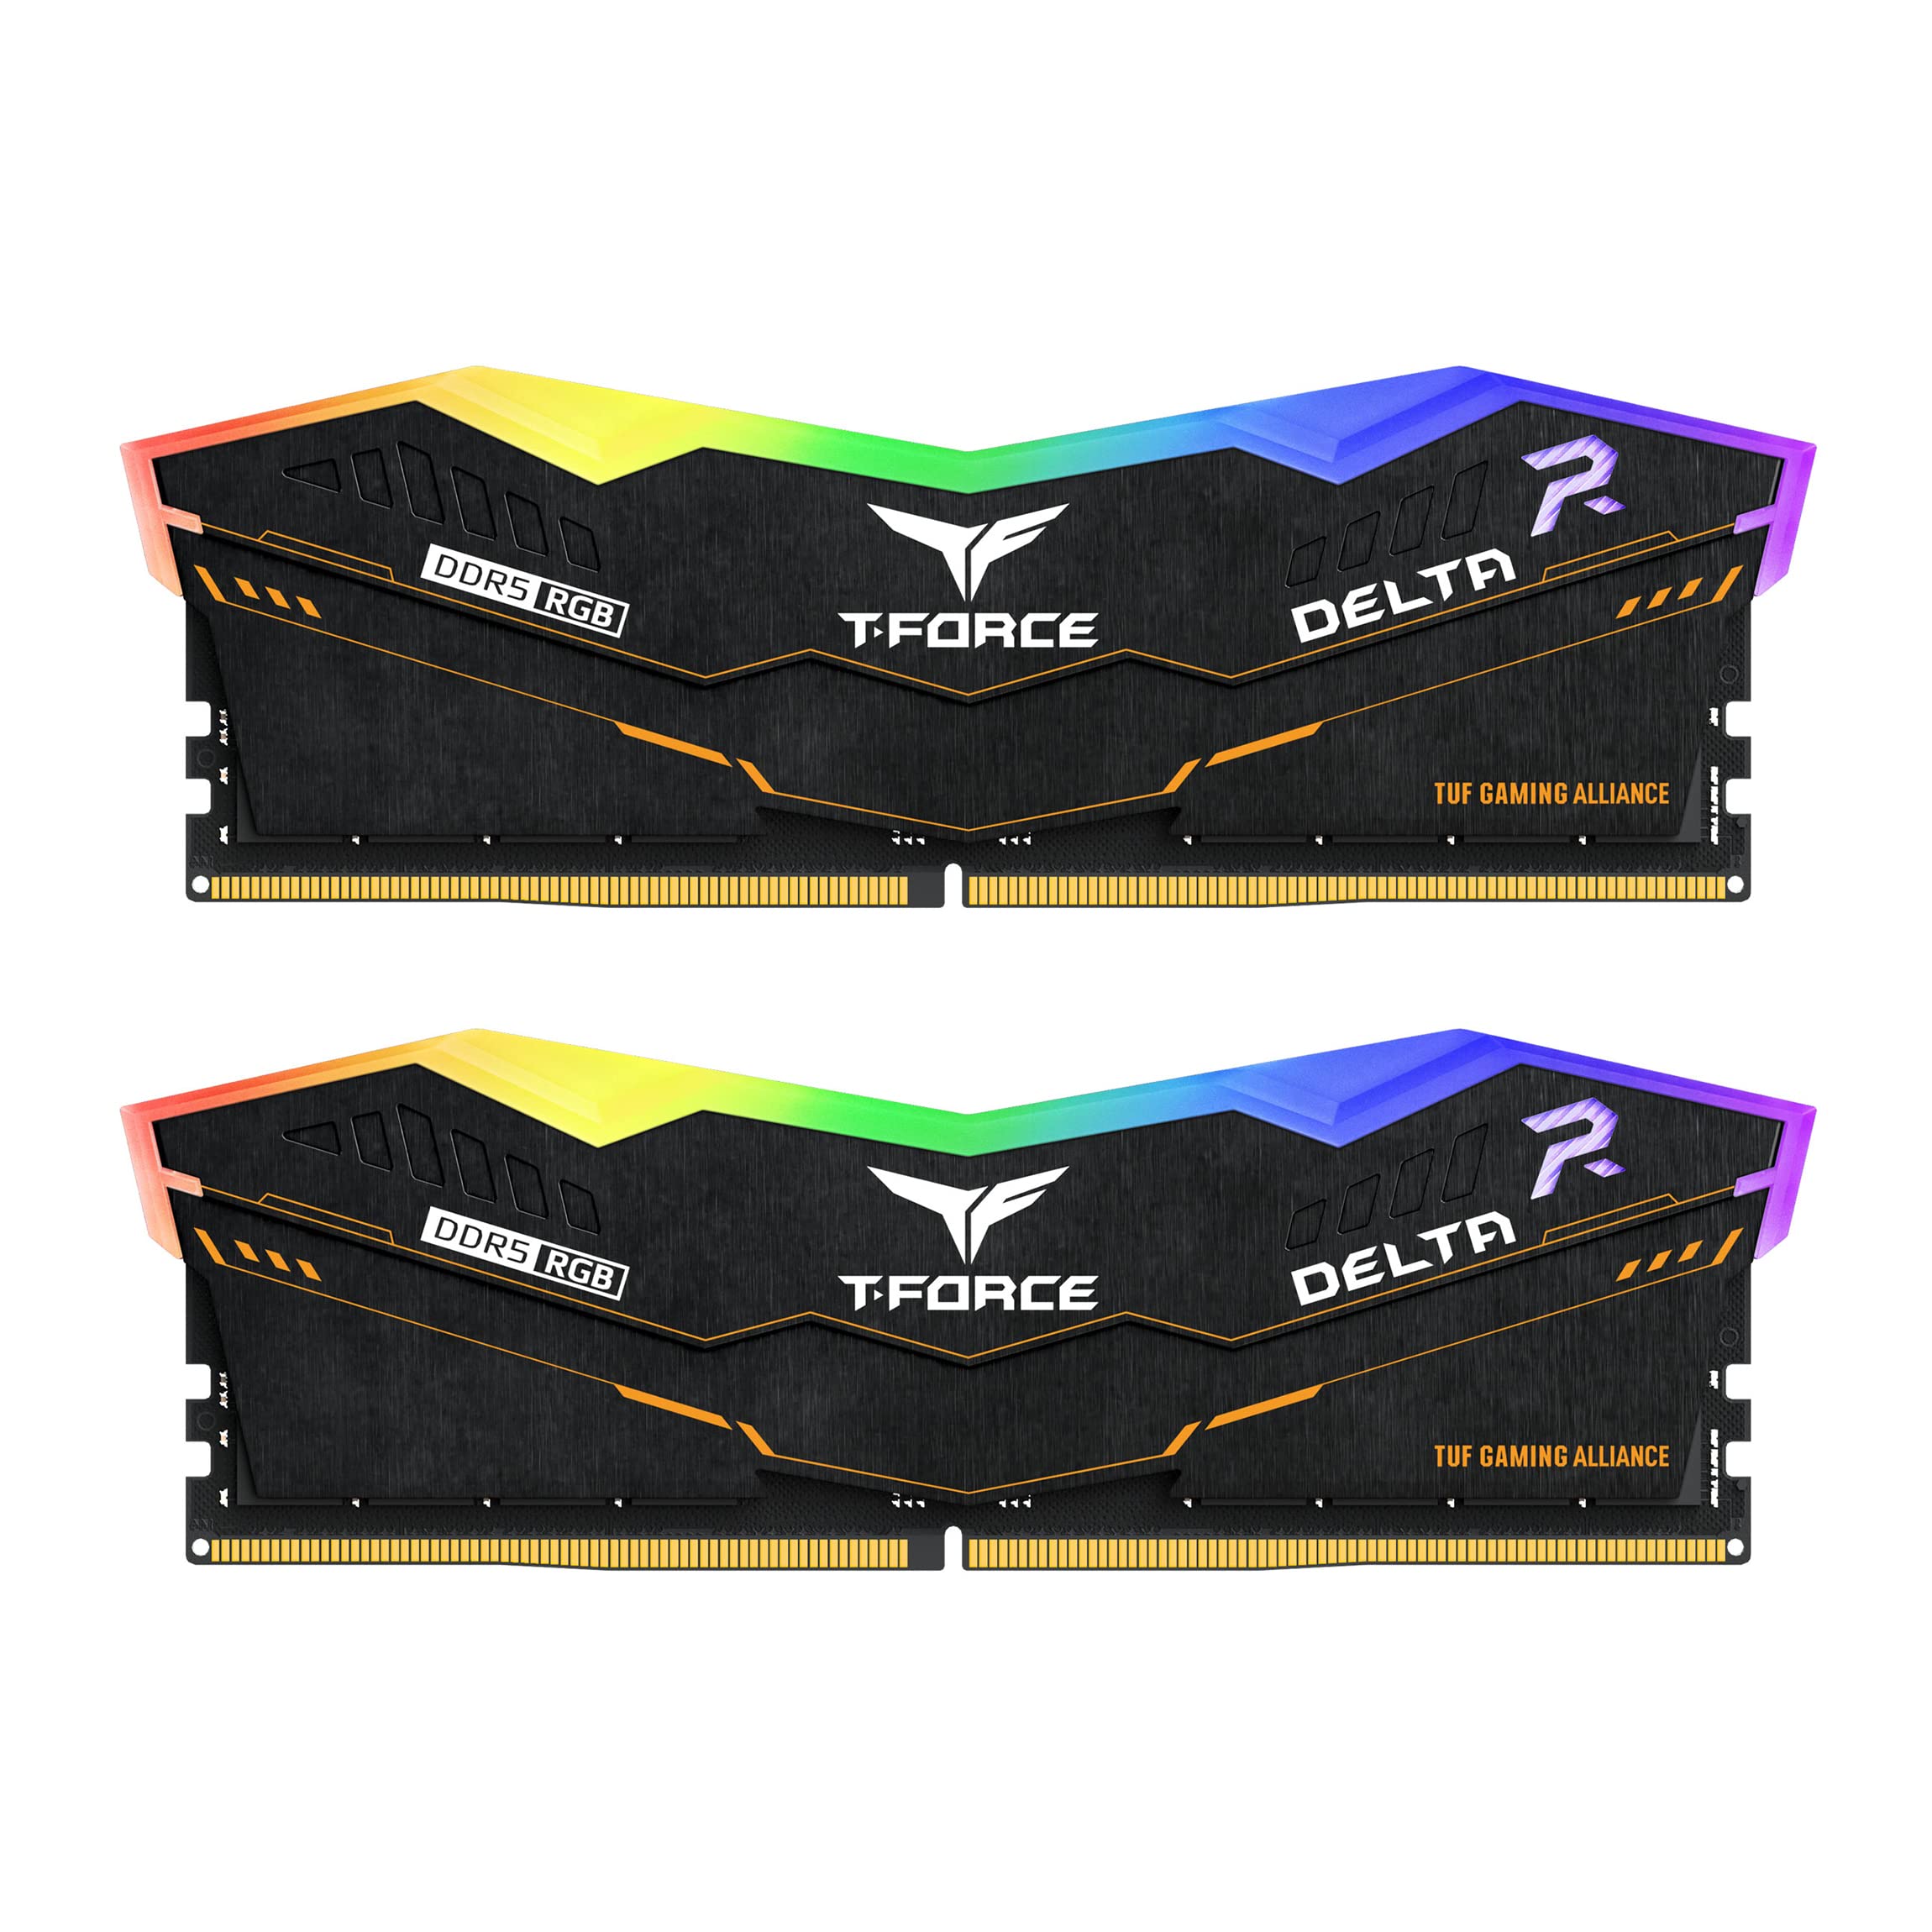 TEAMGROUP T-Force Delta TUF Gaming Alliance RGB DDR5 32GB Kit (2x16GB) 5200MHz (PC5-41600) CL40 Desktop Memory Module Ram (Black) for Z690 - FF5D53...